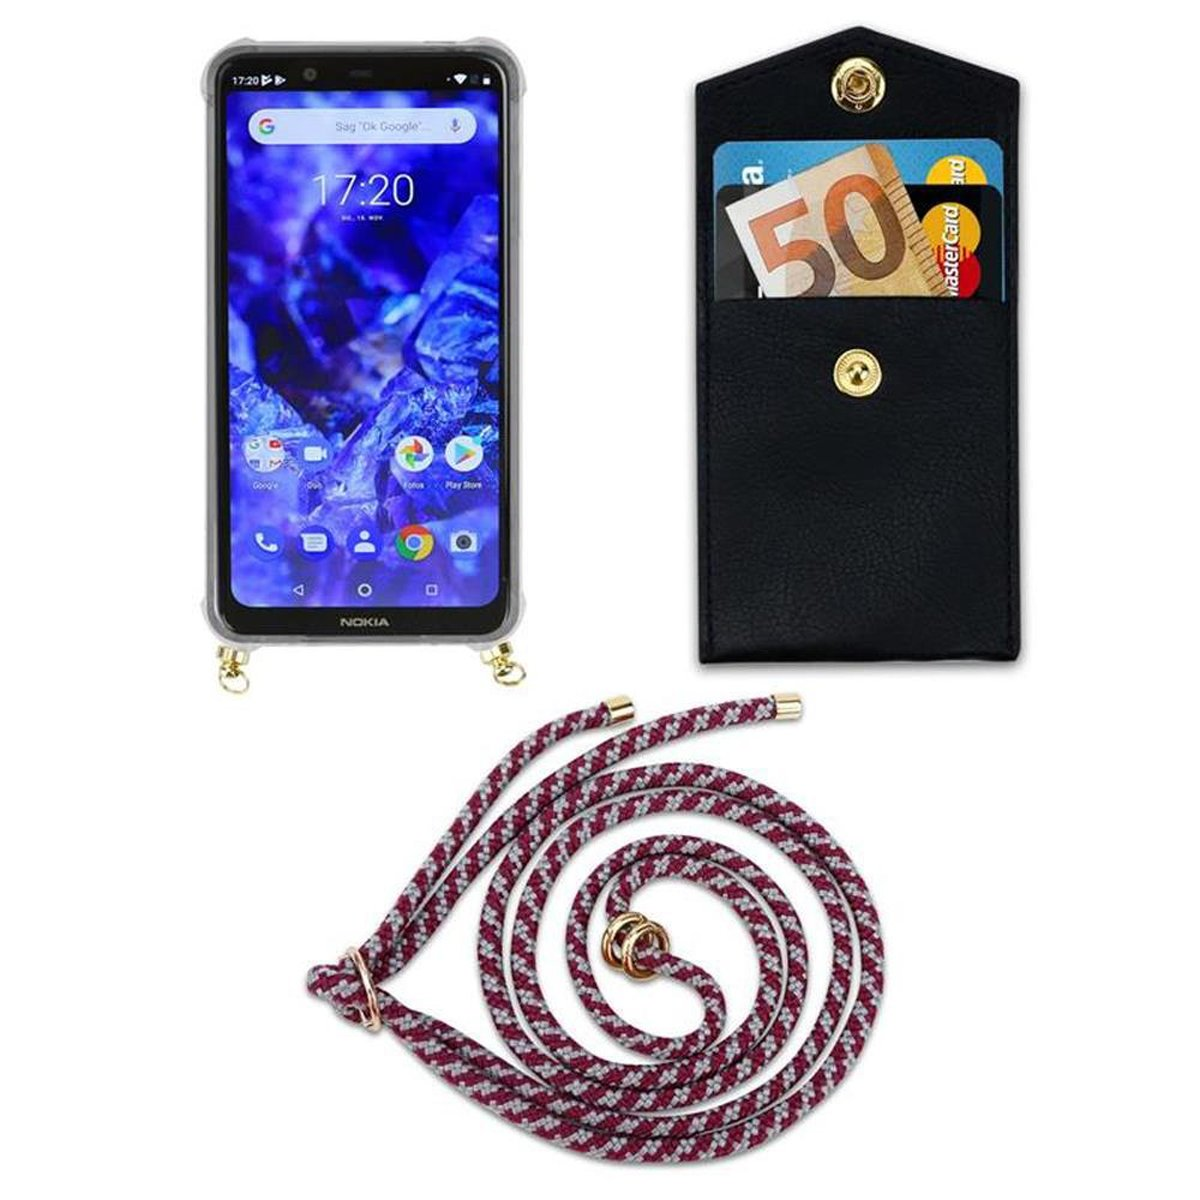 mit X5, WEIß ROT 5.1 abnehmbarer Ringen, Kordel CADORABO Band Hülle, und Backcover, / Handy Kette Gold Nokia, PLUS